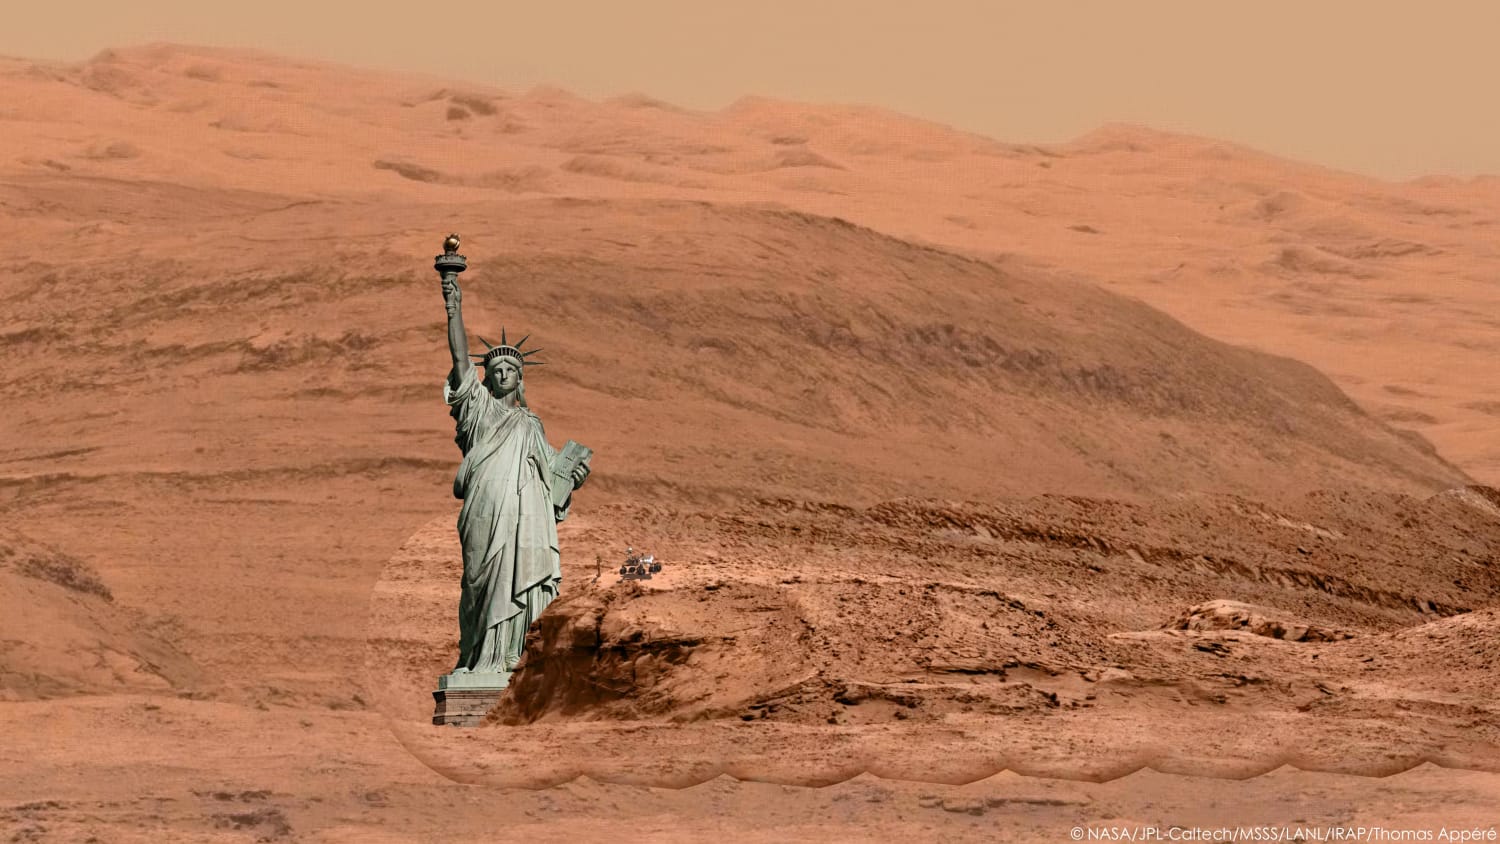 Curiosity rover is heading towards hills at the base of Mount Sharp. I made this photomontage to better grasp their scale, featuring Statue of Liberty, Matt Damon from the Martian and Curiosity itself. The martian panorama is a merge of a high-definition RMI mosaic and a low-def taken with MastCam.